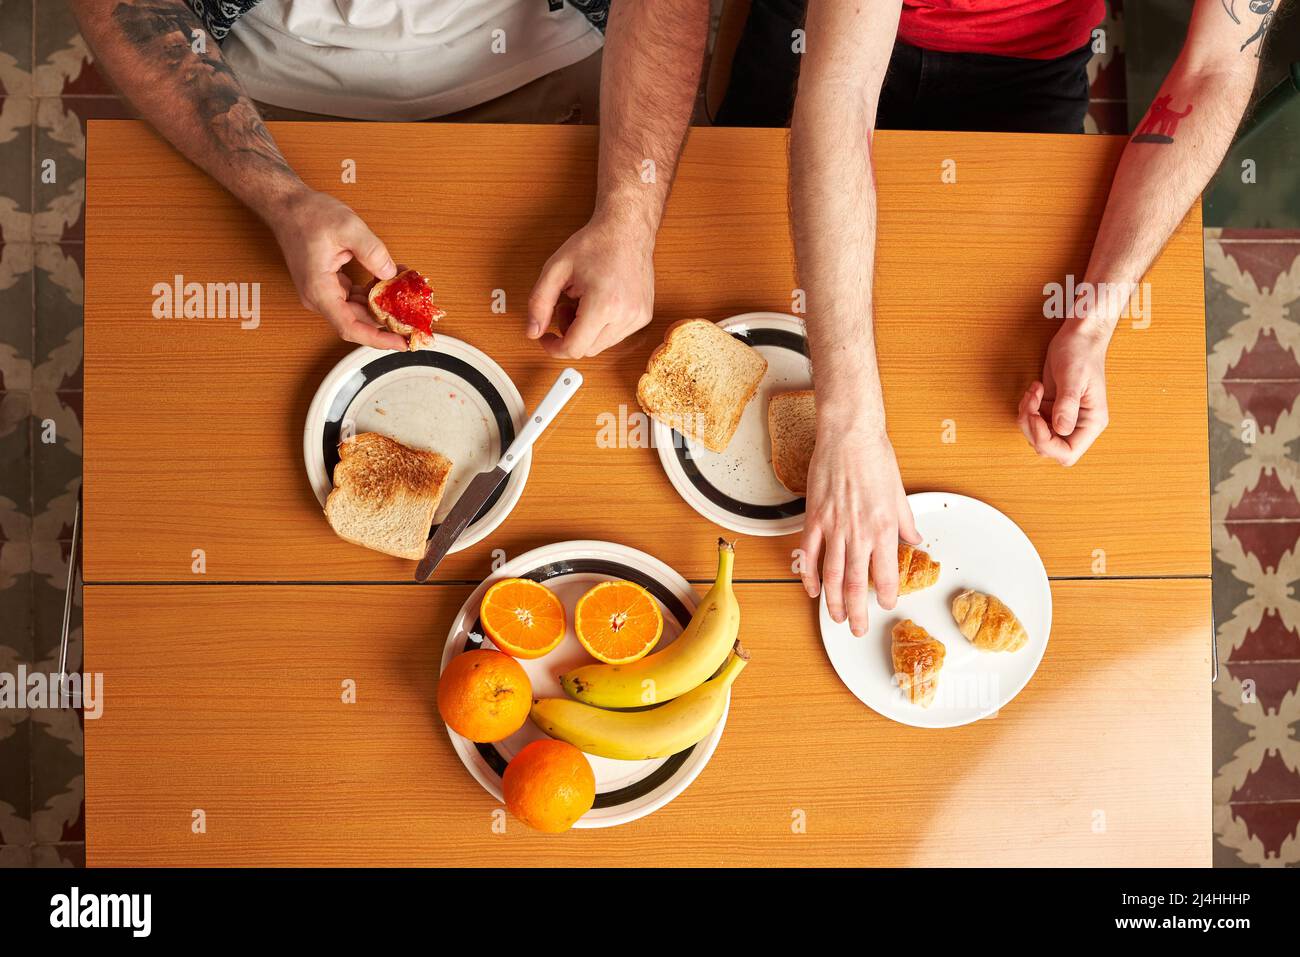 Top view of a table in the kitchen with two gay men having breakfast Stock Photo